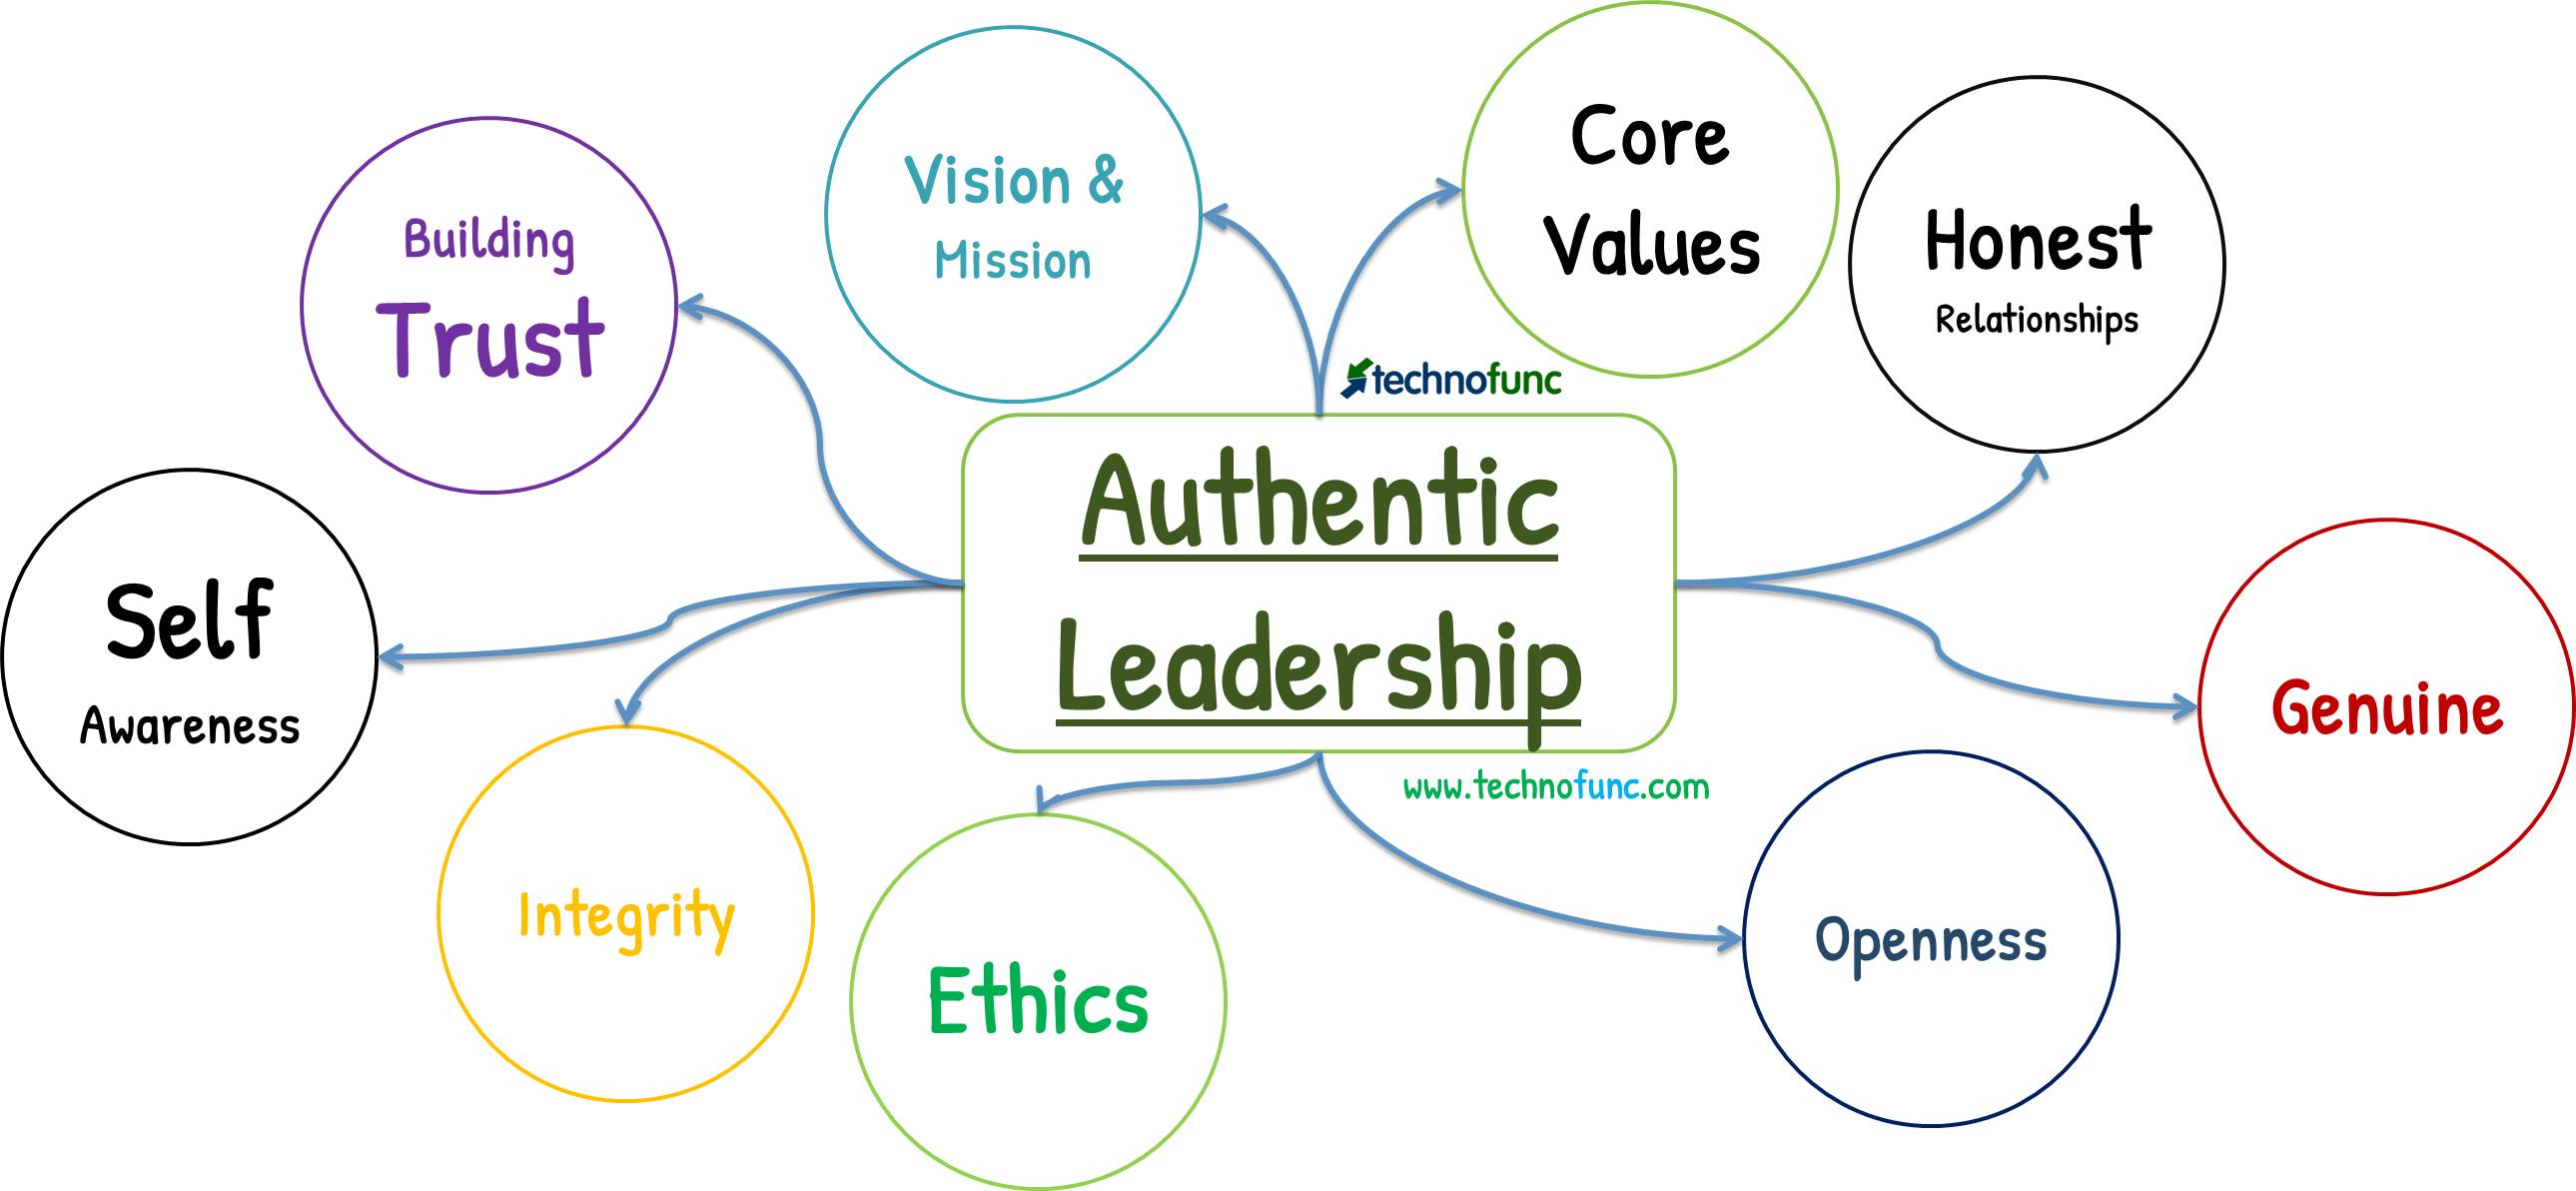 The Truth About Authentic Leadership by Bill George - YouTube